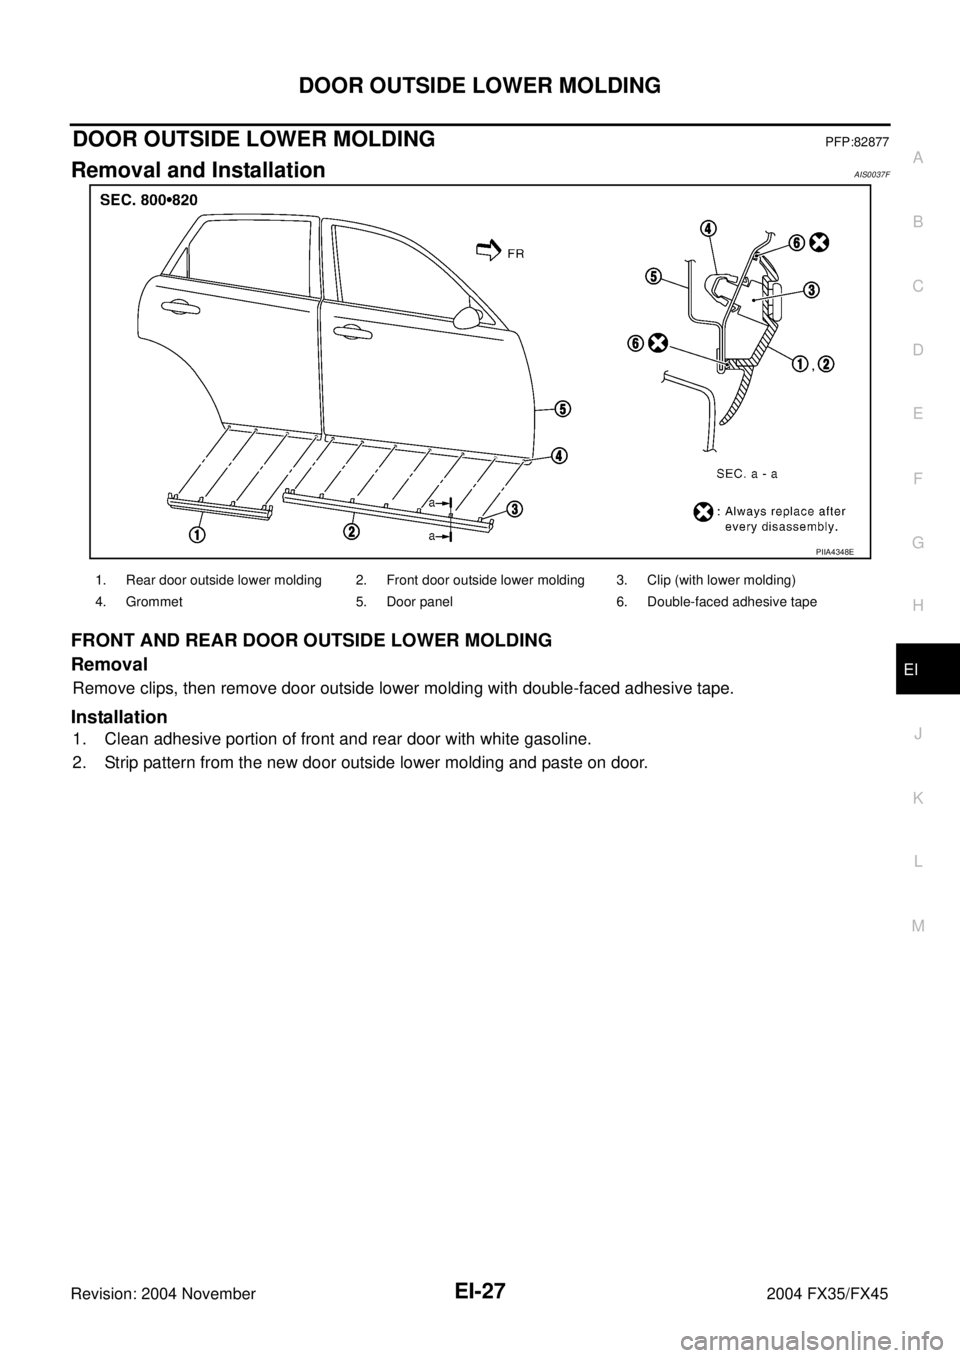 INFINITI FX35 2004  Service Manual DOOR OUTSIDE LOWER MOLDING
EI-27
C
D
E
F
G
H
J
K
L
MA
B
EI
Revision: 2004 November 2004 FX35/FX45
DOOR OUTSIDE LOWER MOLDINGPFP:82877
Removal and InstallationAIS0037F
FRONT AND REAR DOOR OUTSIDE LOWER